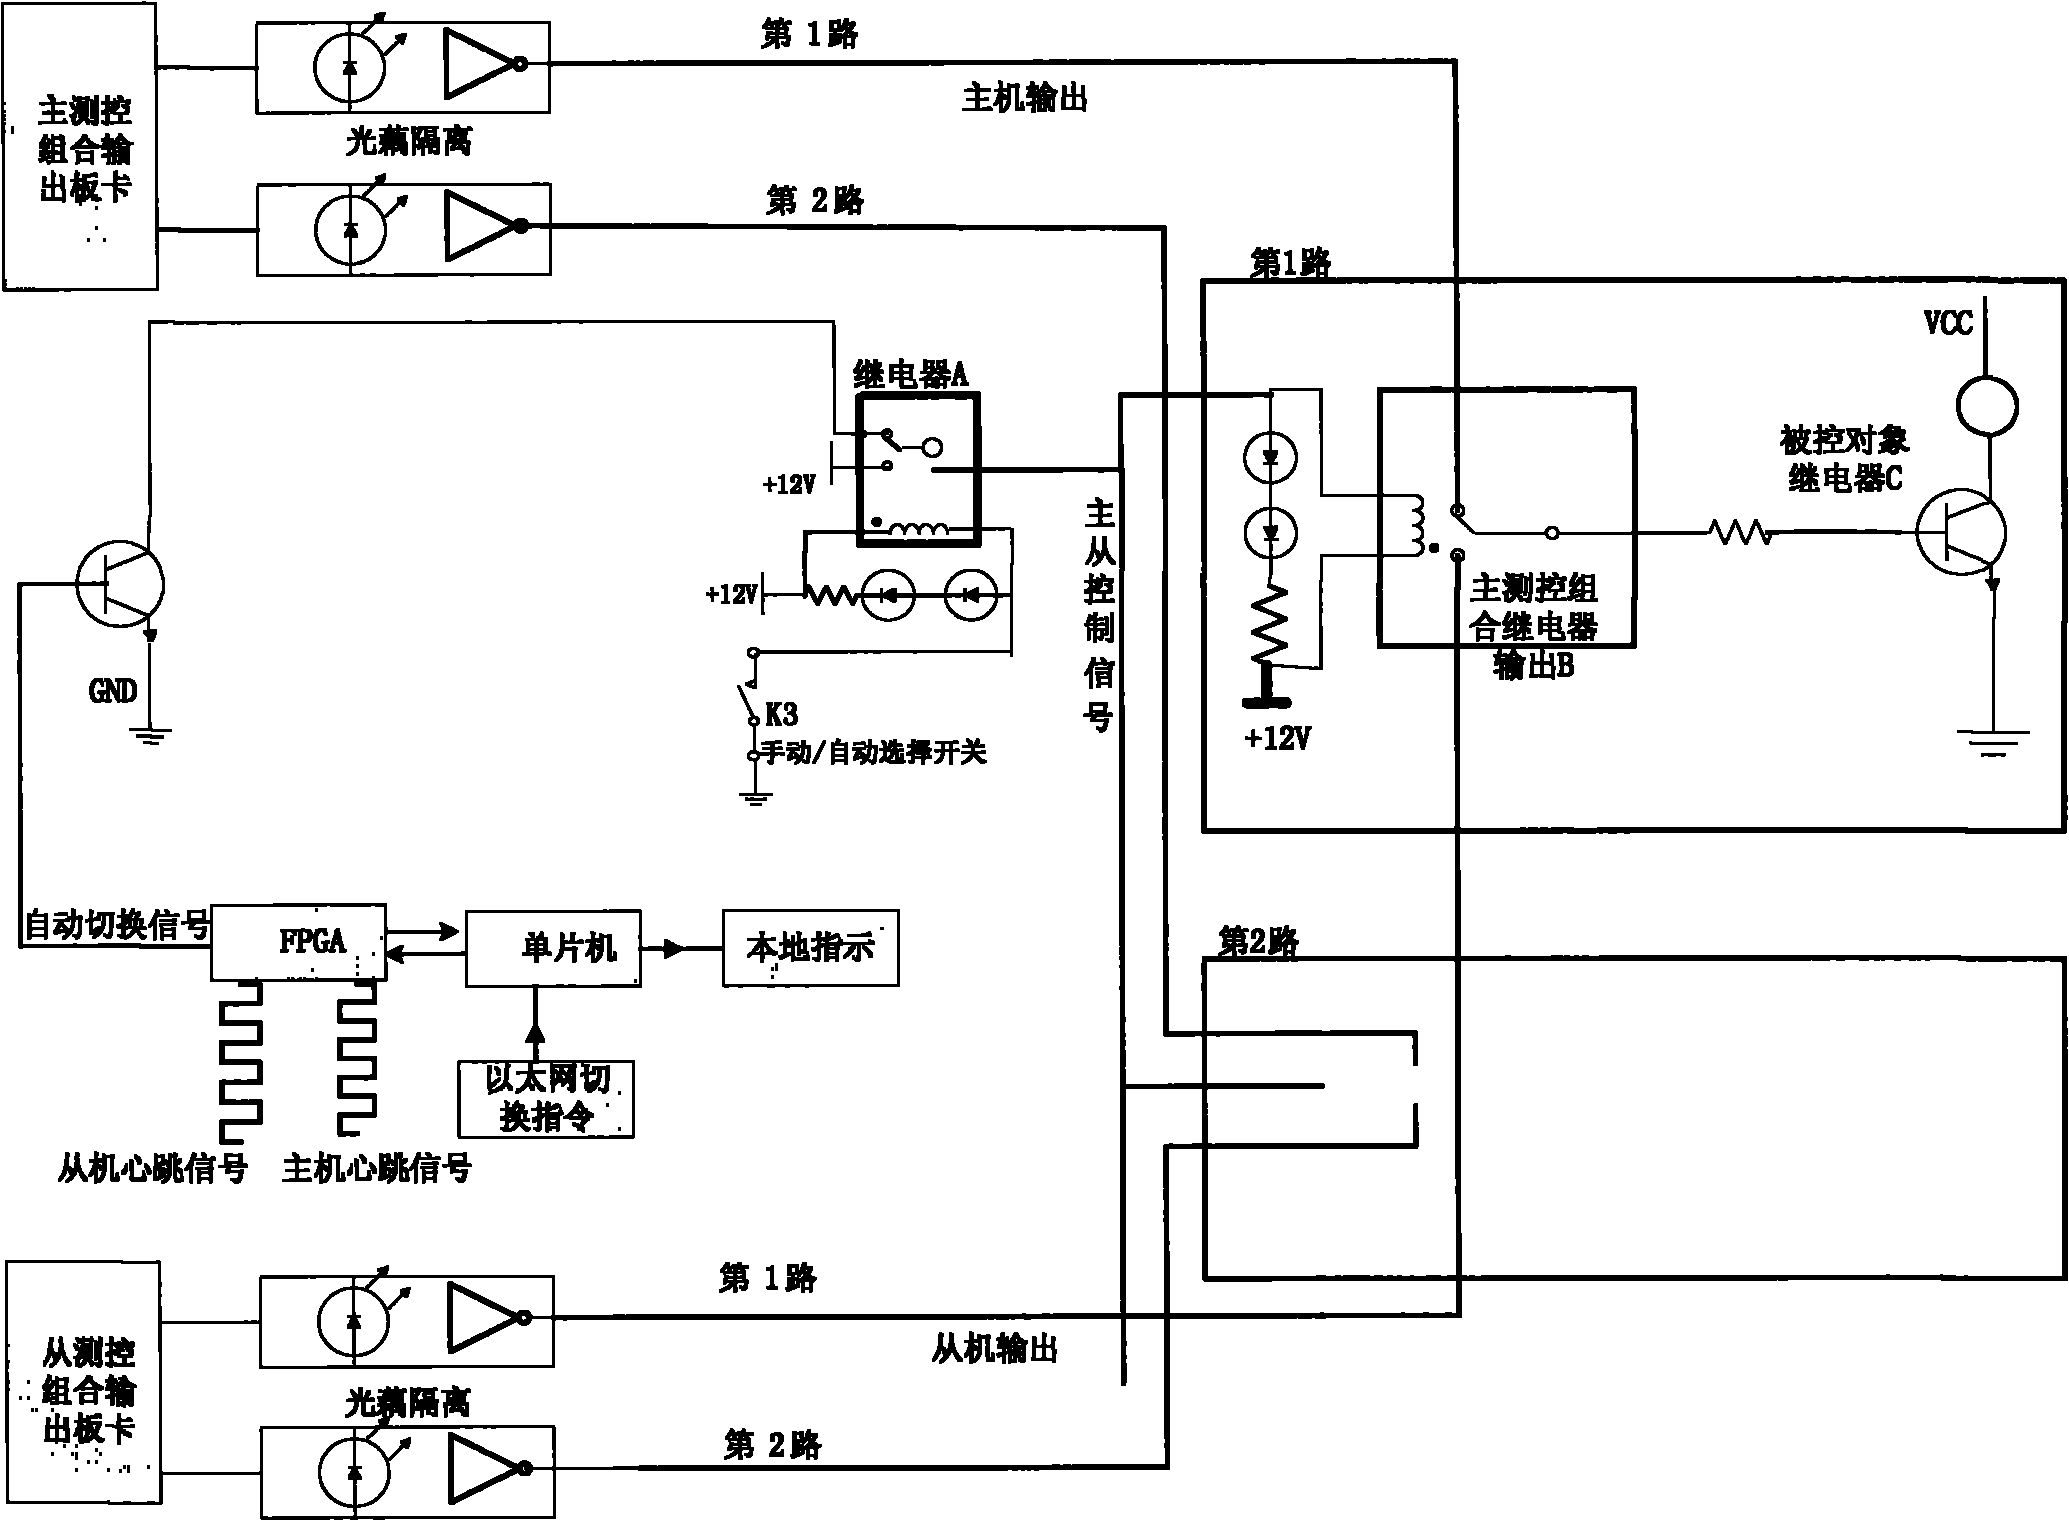 Redundancy switching circuit used for ground test launch and control system of carrier rocket